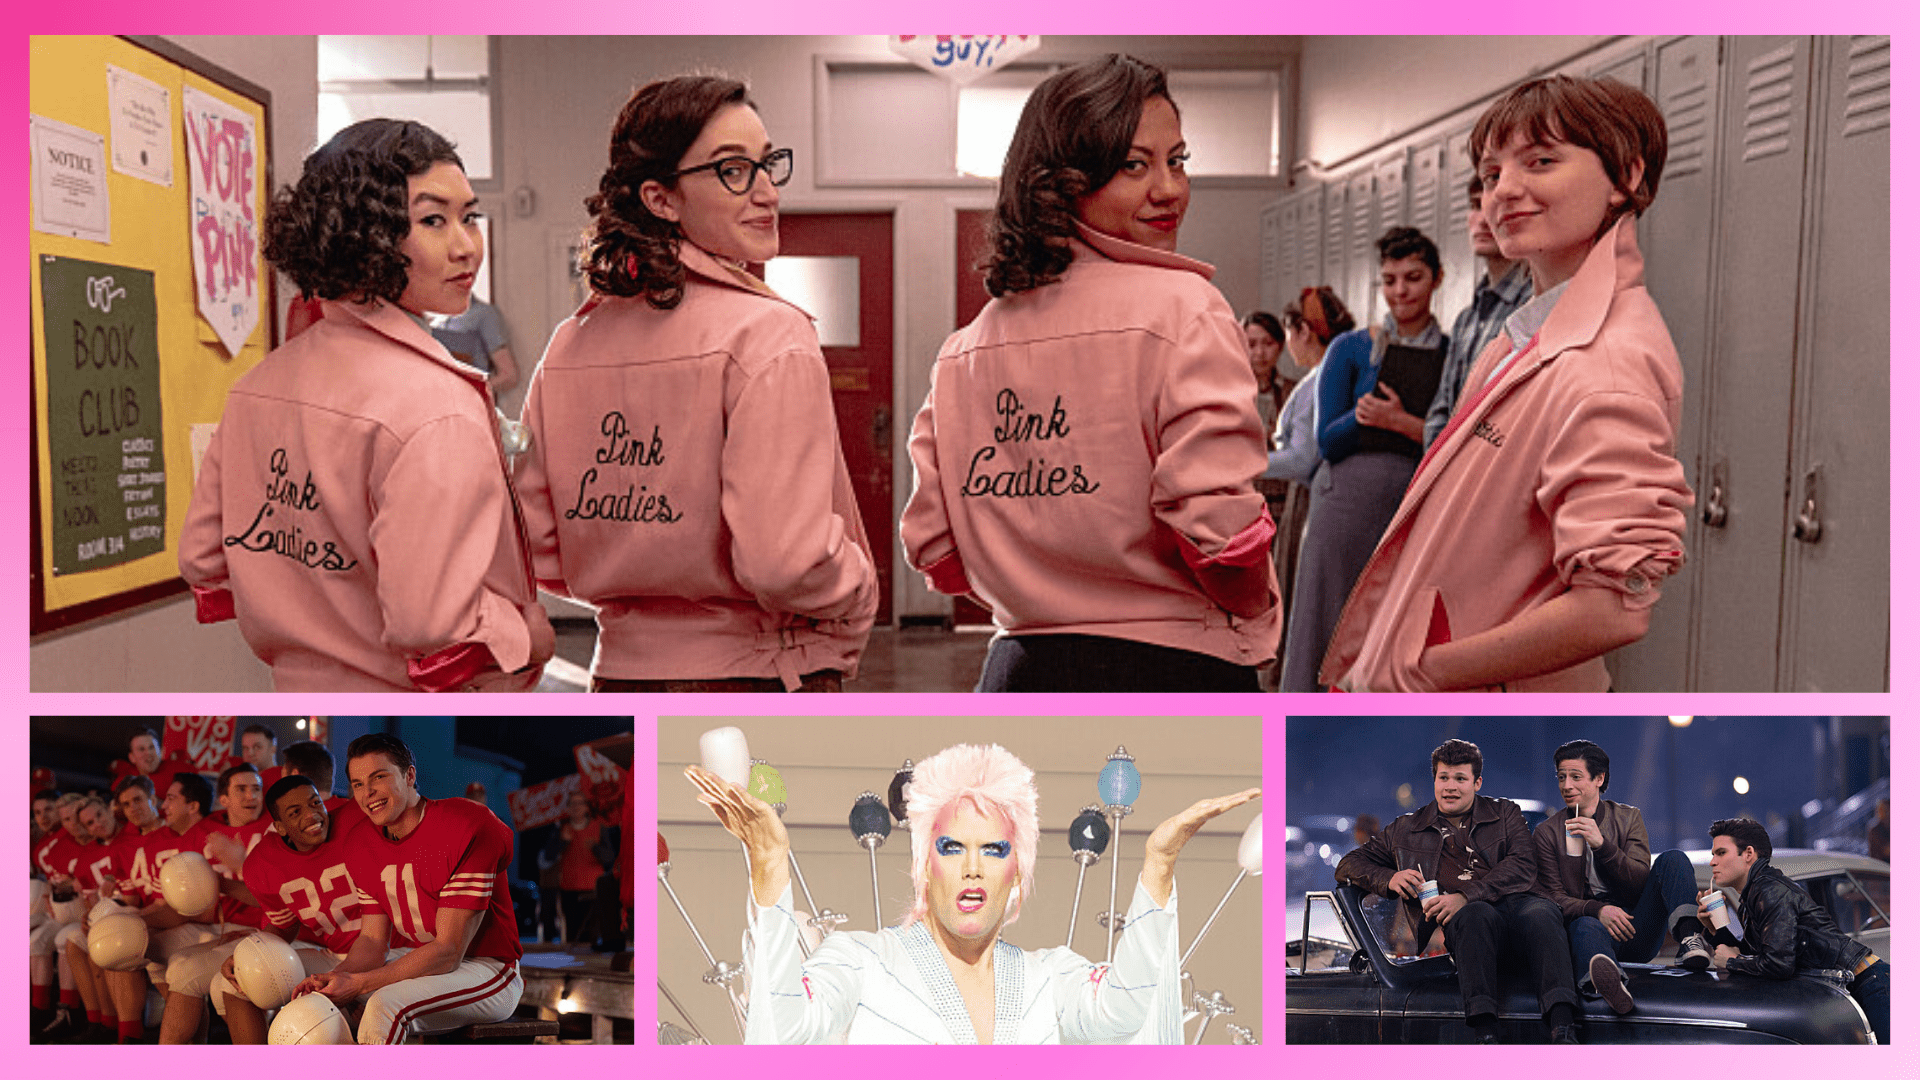 A collage of images from the film Grease, including stills from the movie and a photo of the Pink Ladies wearing pink jackets. - Will Poulter